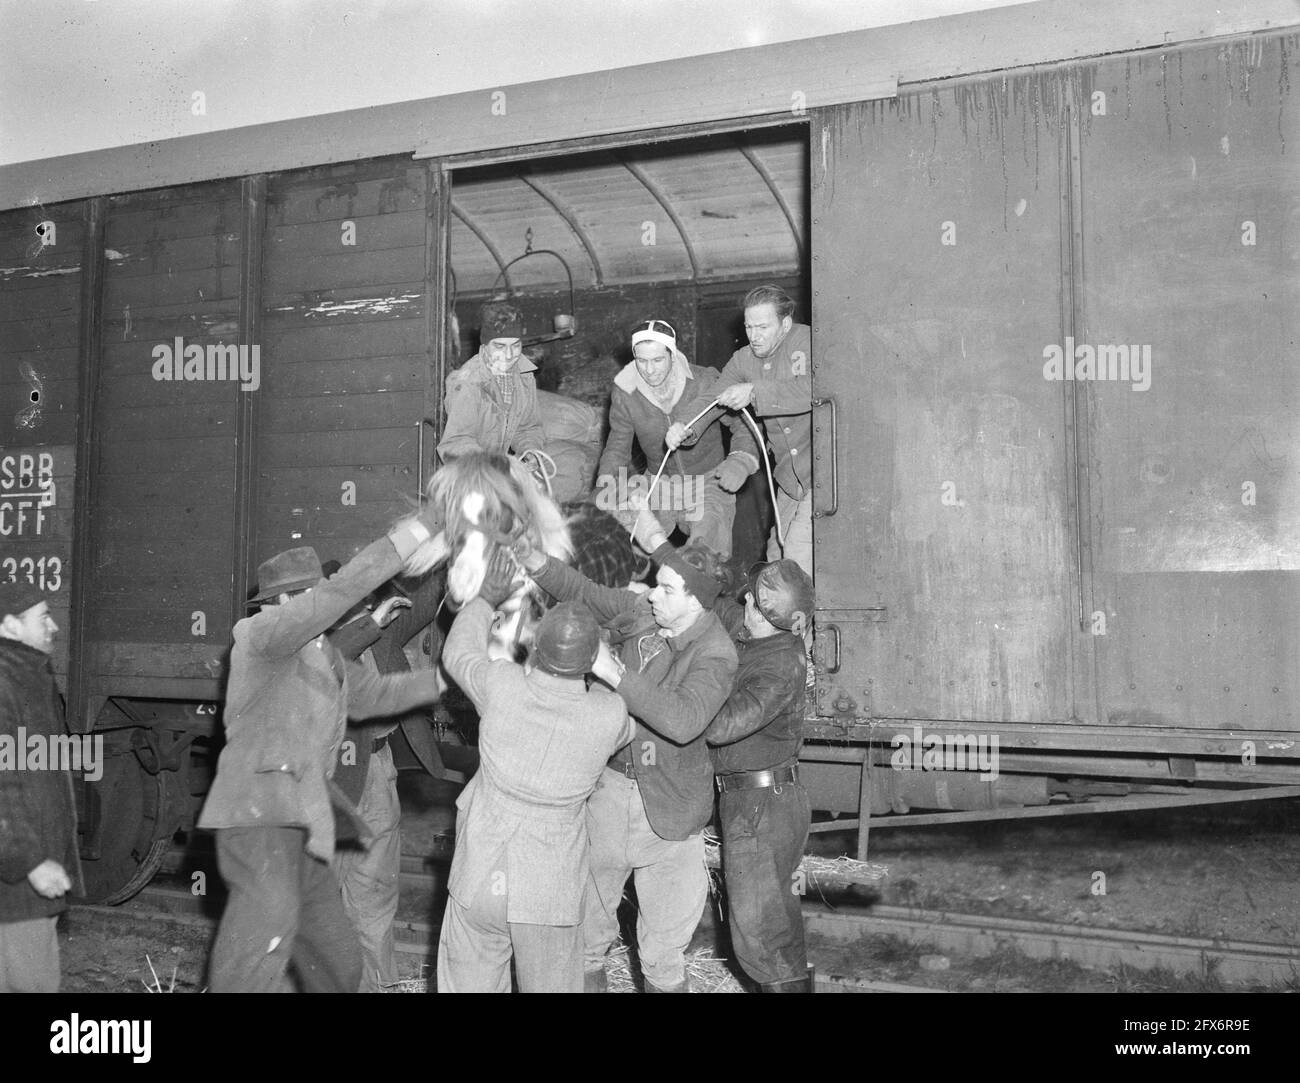 Circus Union, December 13, 1946, CIRCUS, UNION, The Netherlands, 20th century press agency photo, news to remember, documentary, historic photography 1945-1990, visual stories, human history of the Twentieth Century, capturing moments in time Stock Photo